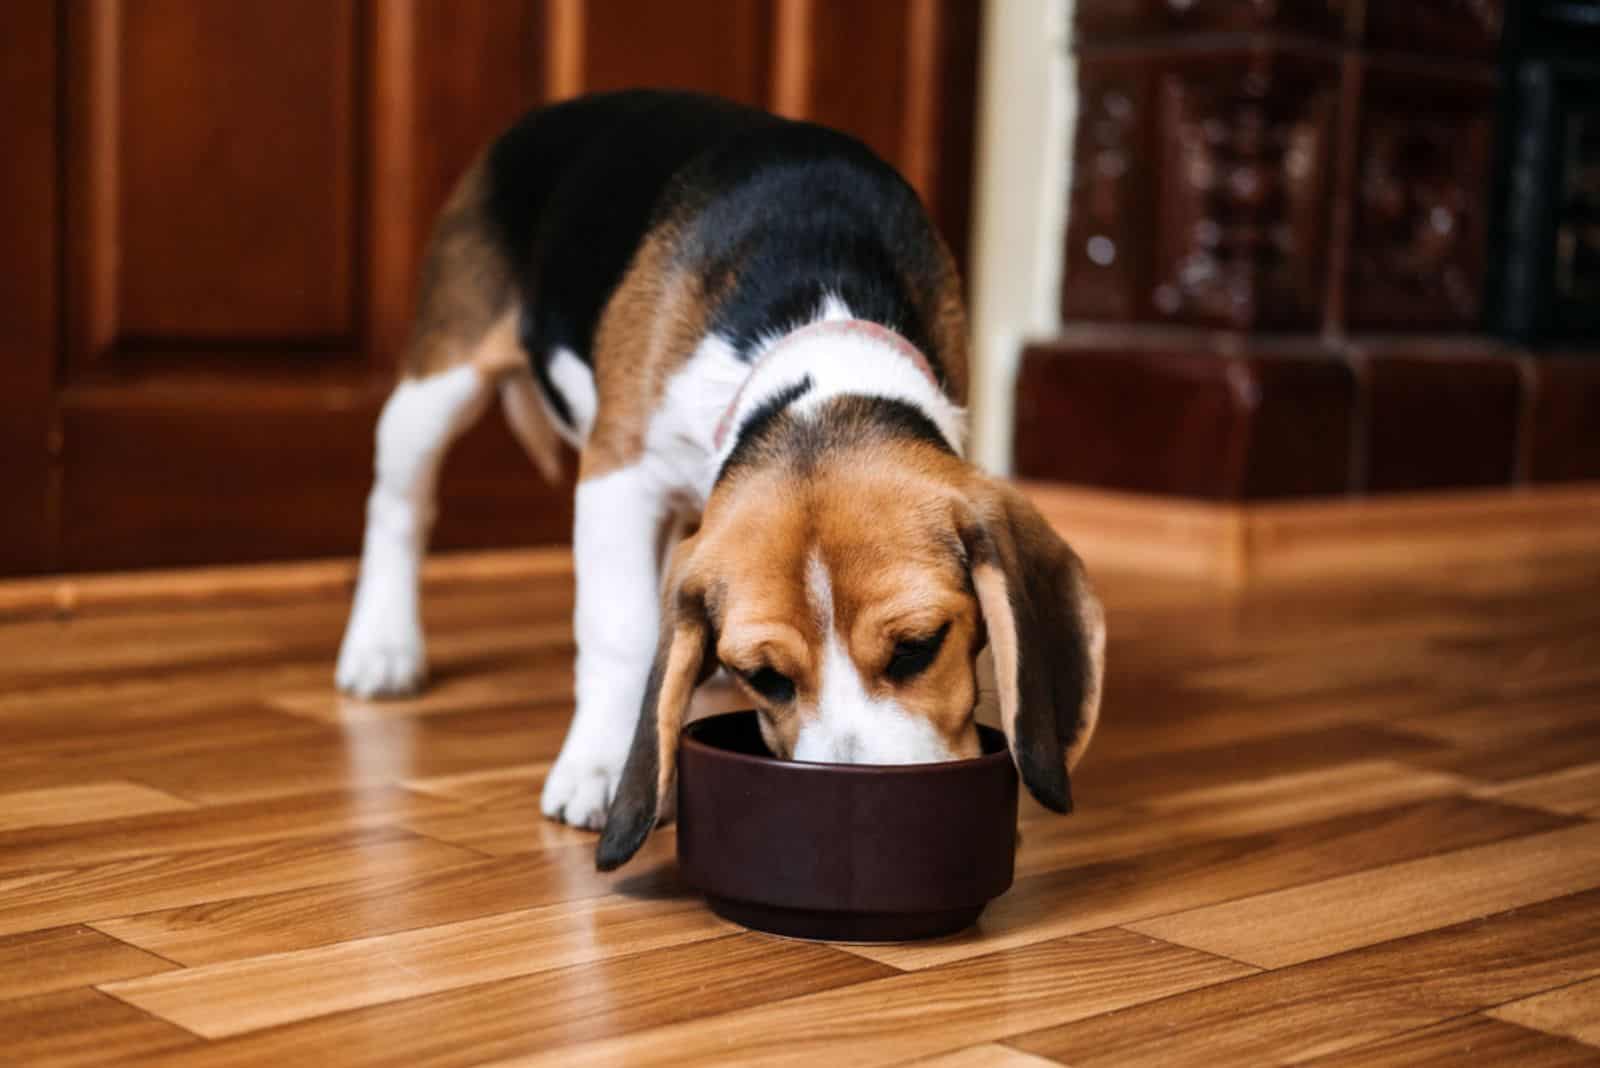 the dog eats from a black bowl